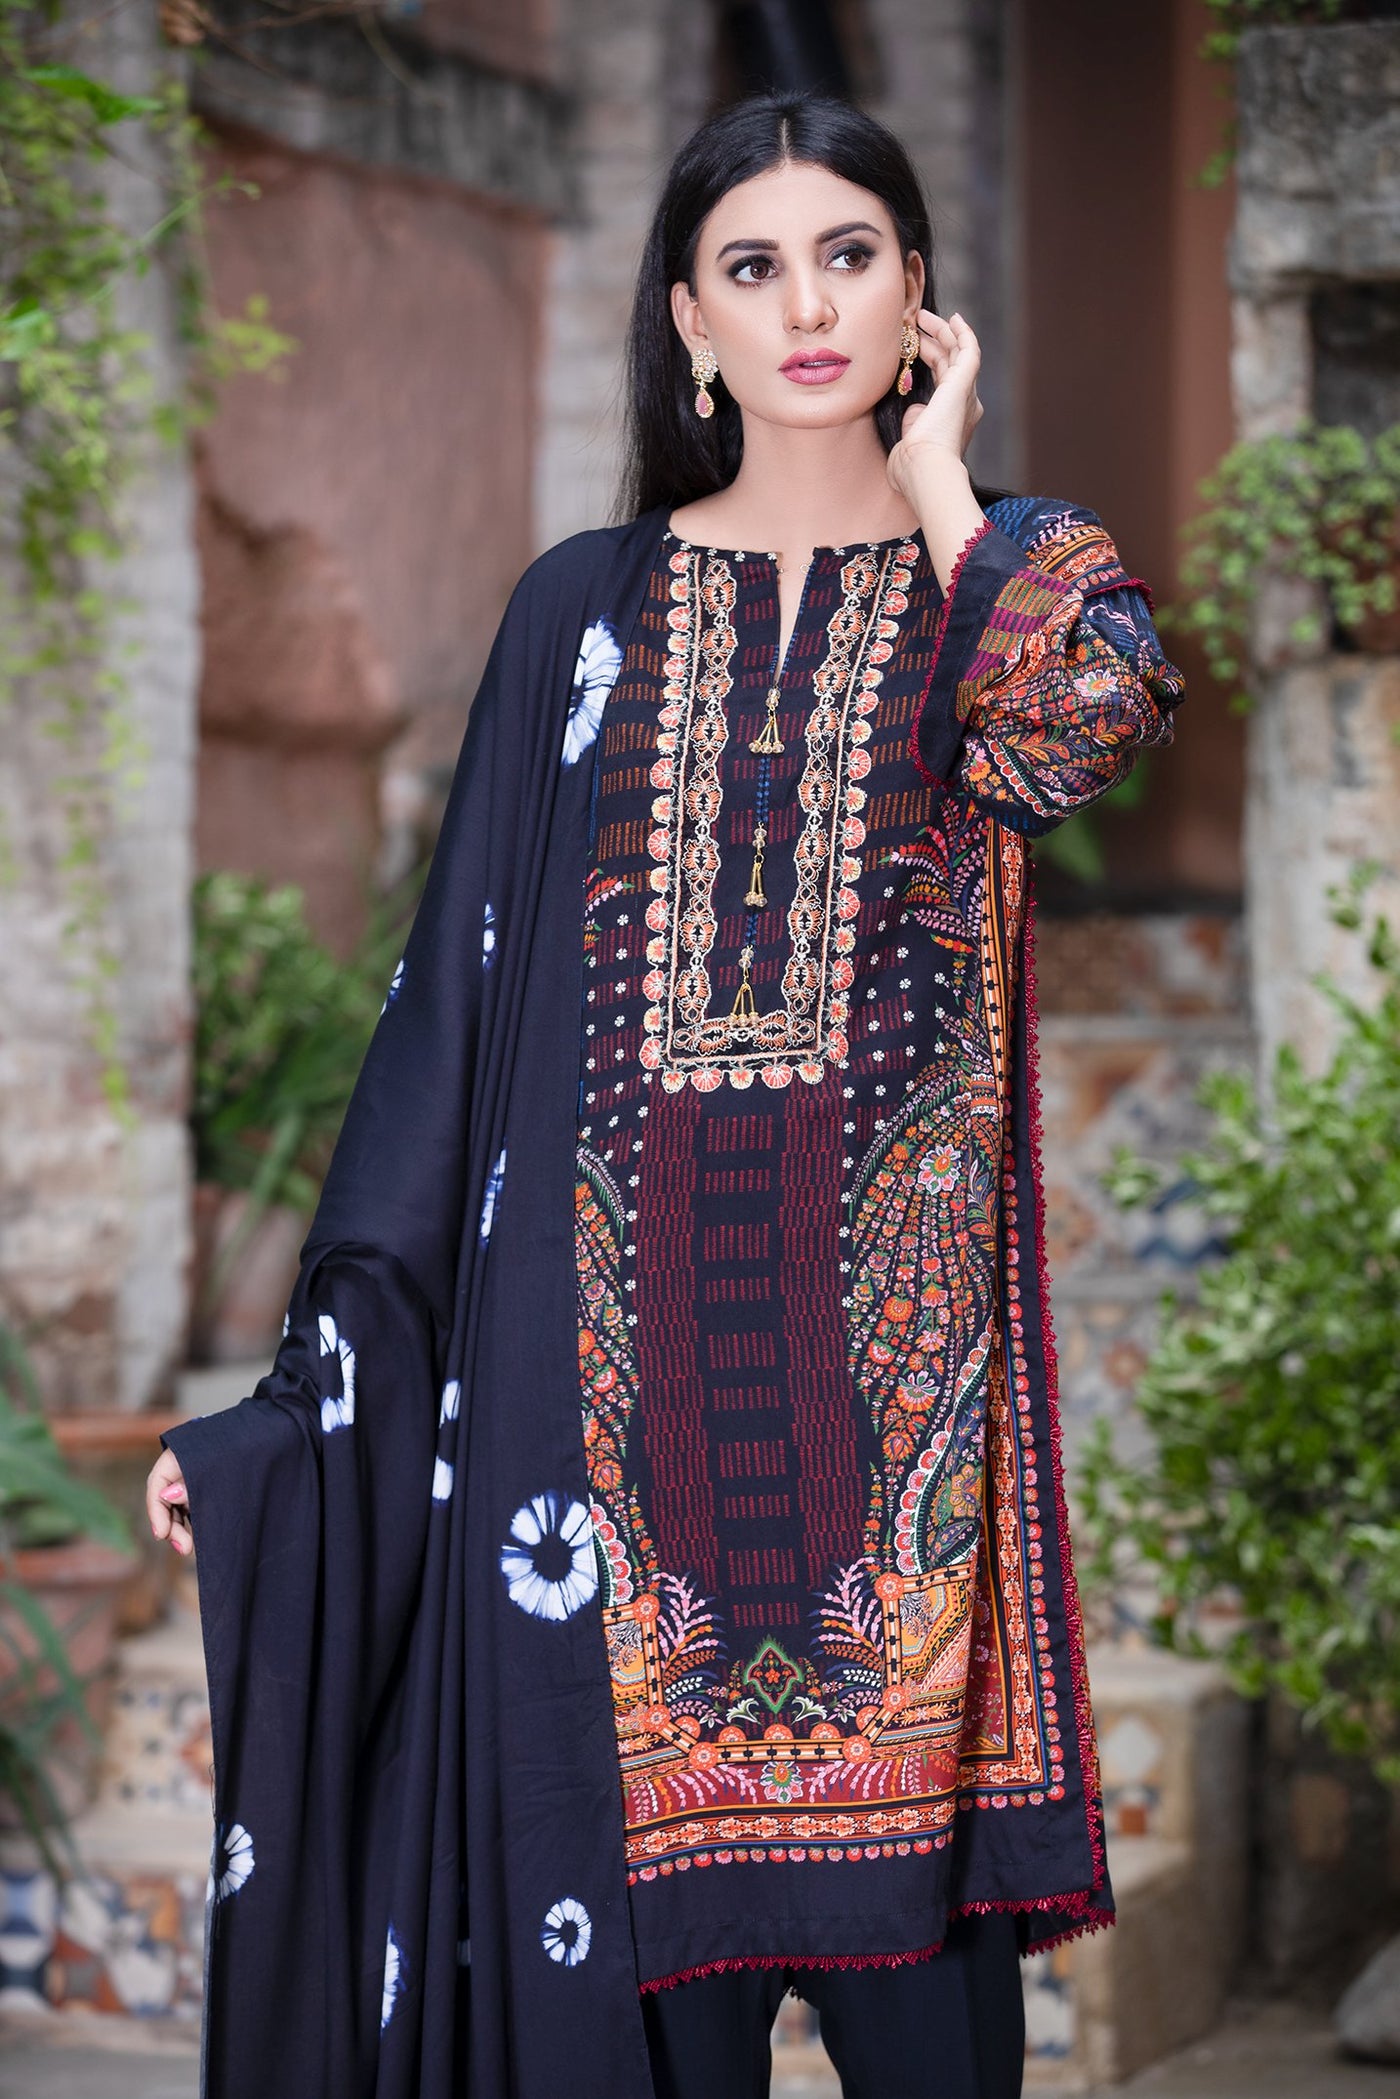 Cottel 3 Pcs Stitched Suit-Digital Printed Cottel Shirt with Neckline Embroidery-Cottel Digital Print Dupatta-Dyed Cottel trousers Front Near View